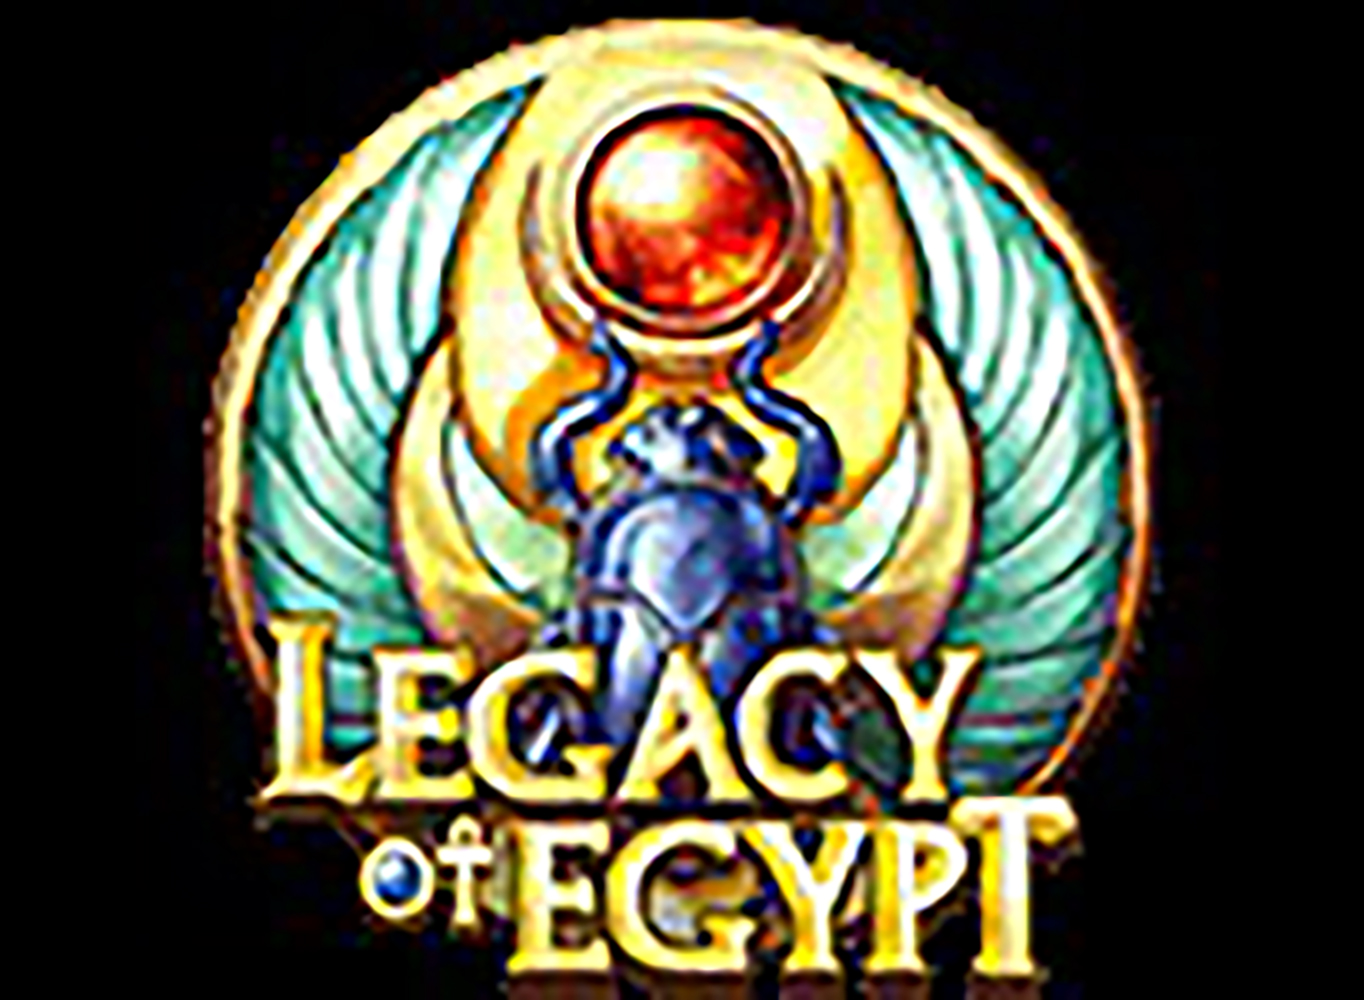 png-legacy of egypt